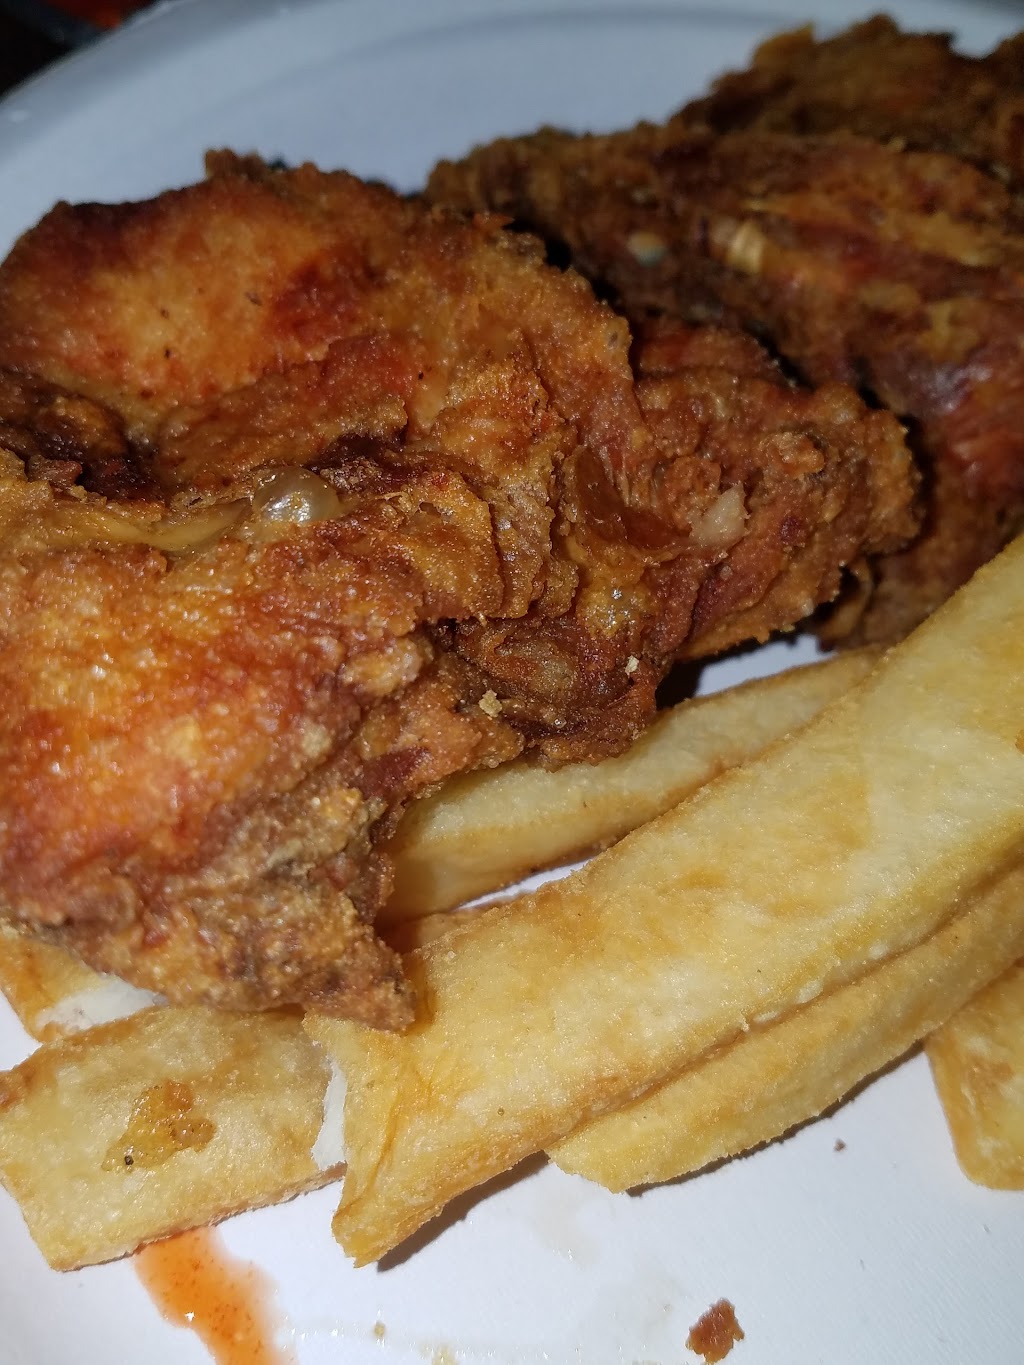 Chicken Holiday | 1865 N Olden Ave, Ewing Township, NJ 08638 | Phone: (609) 882-6060